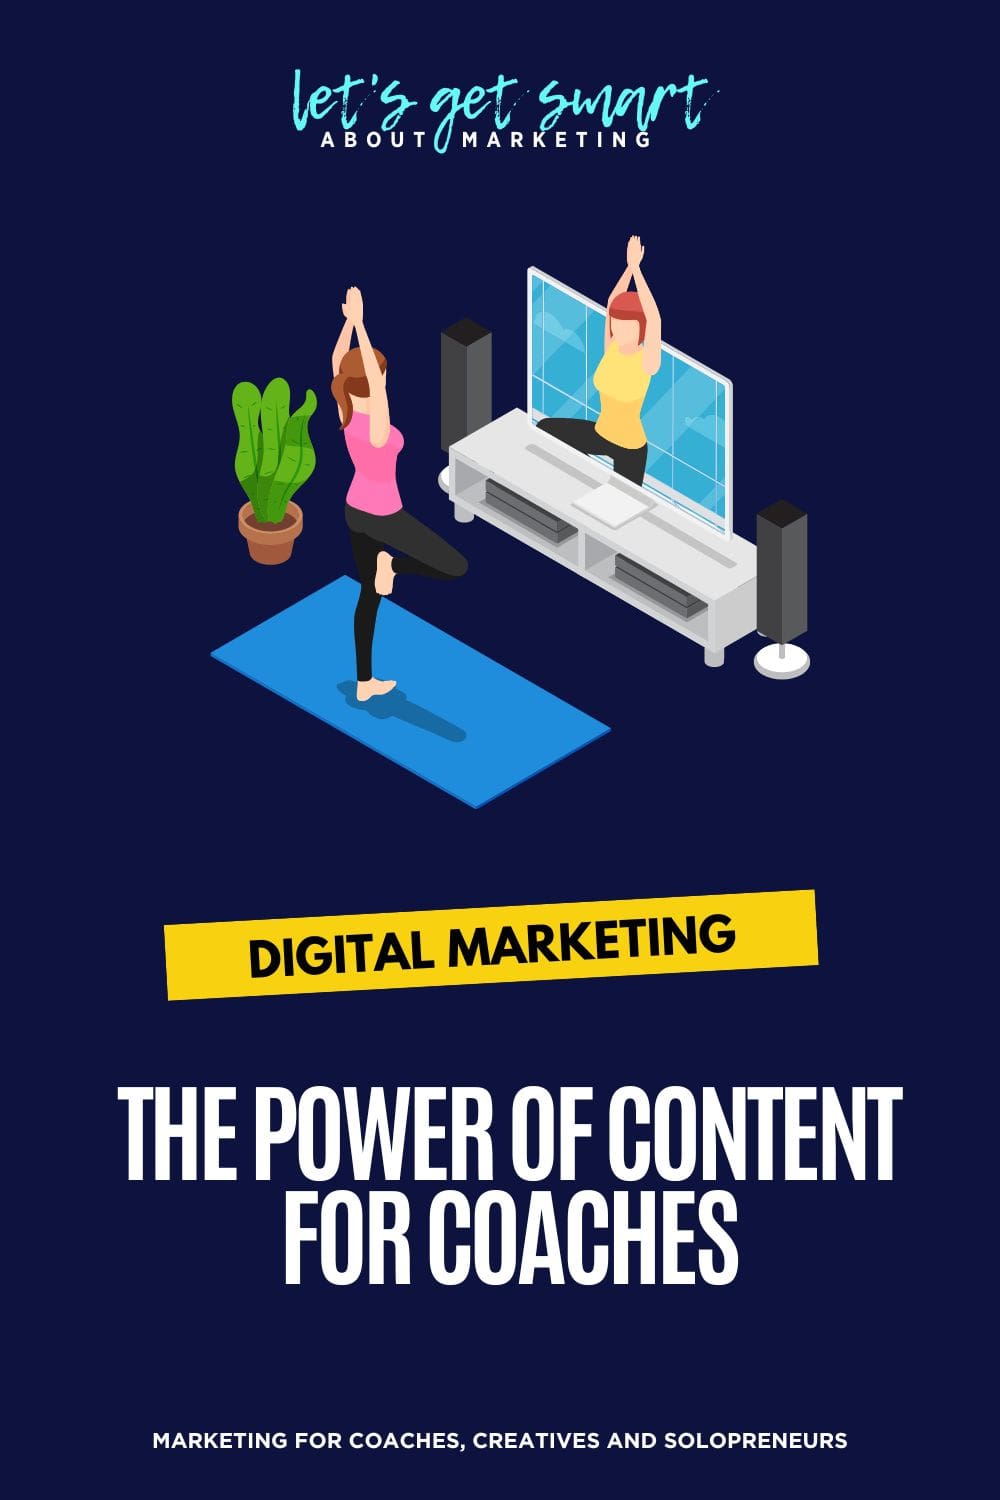 Content Marketing for Health Coaches - How to Get Started